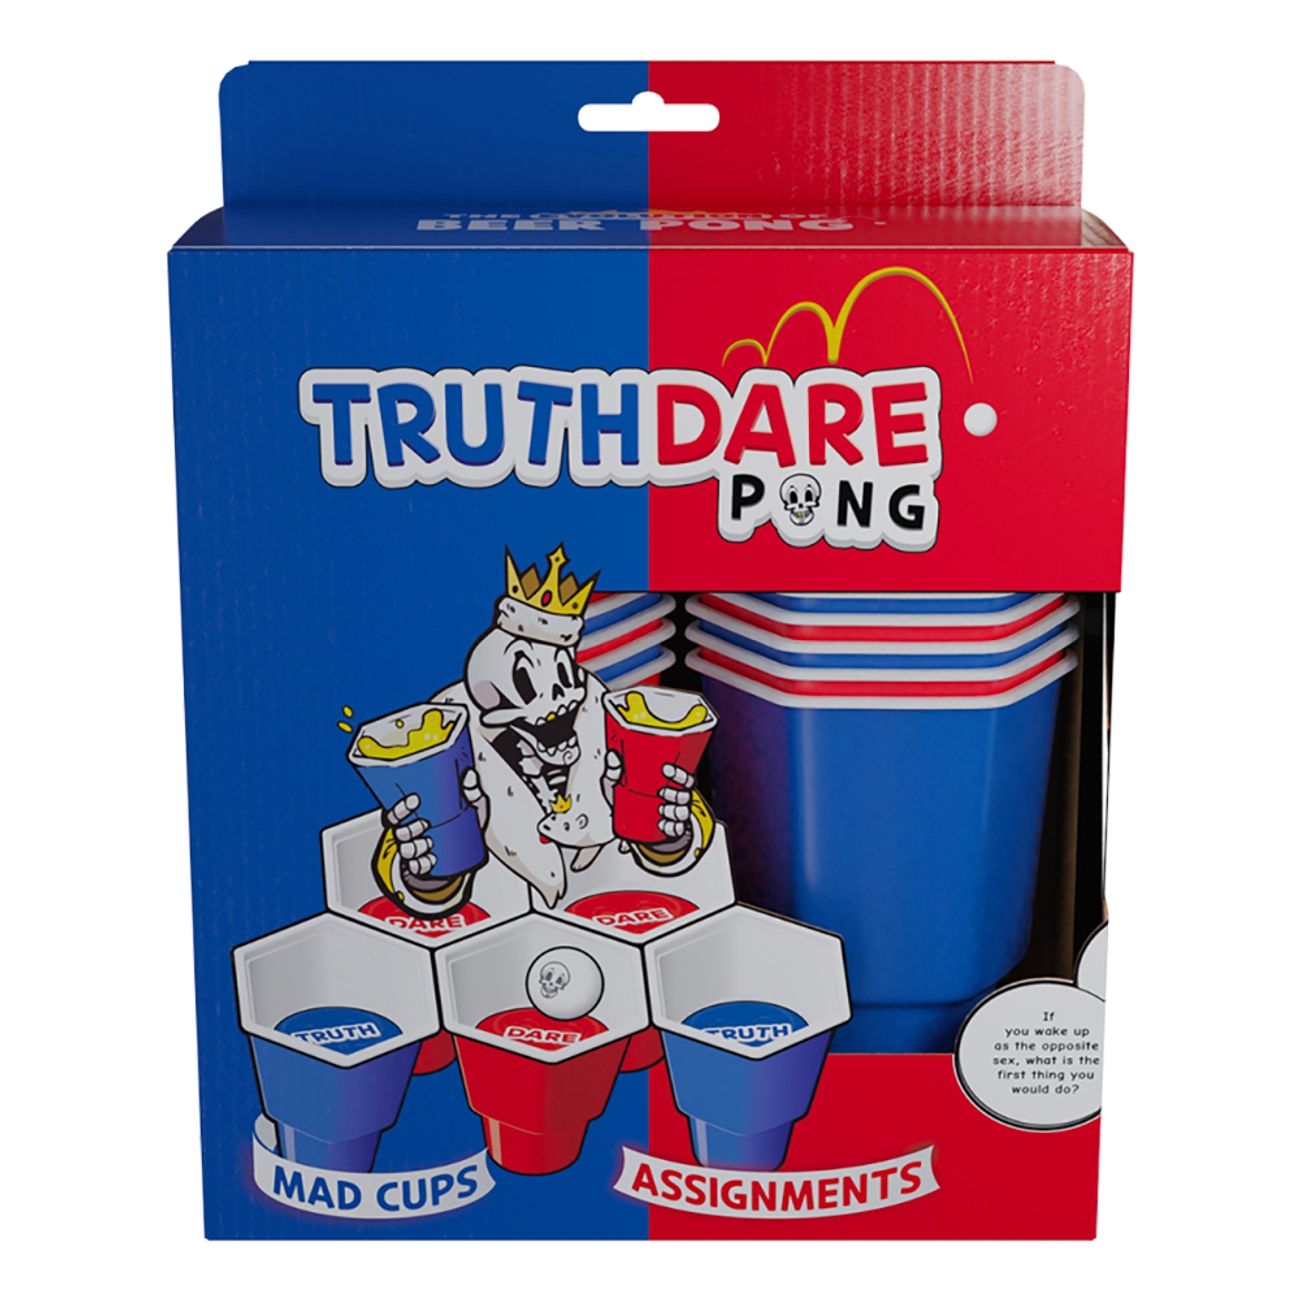 truth-dare-pong-73886-4